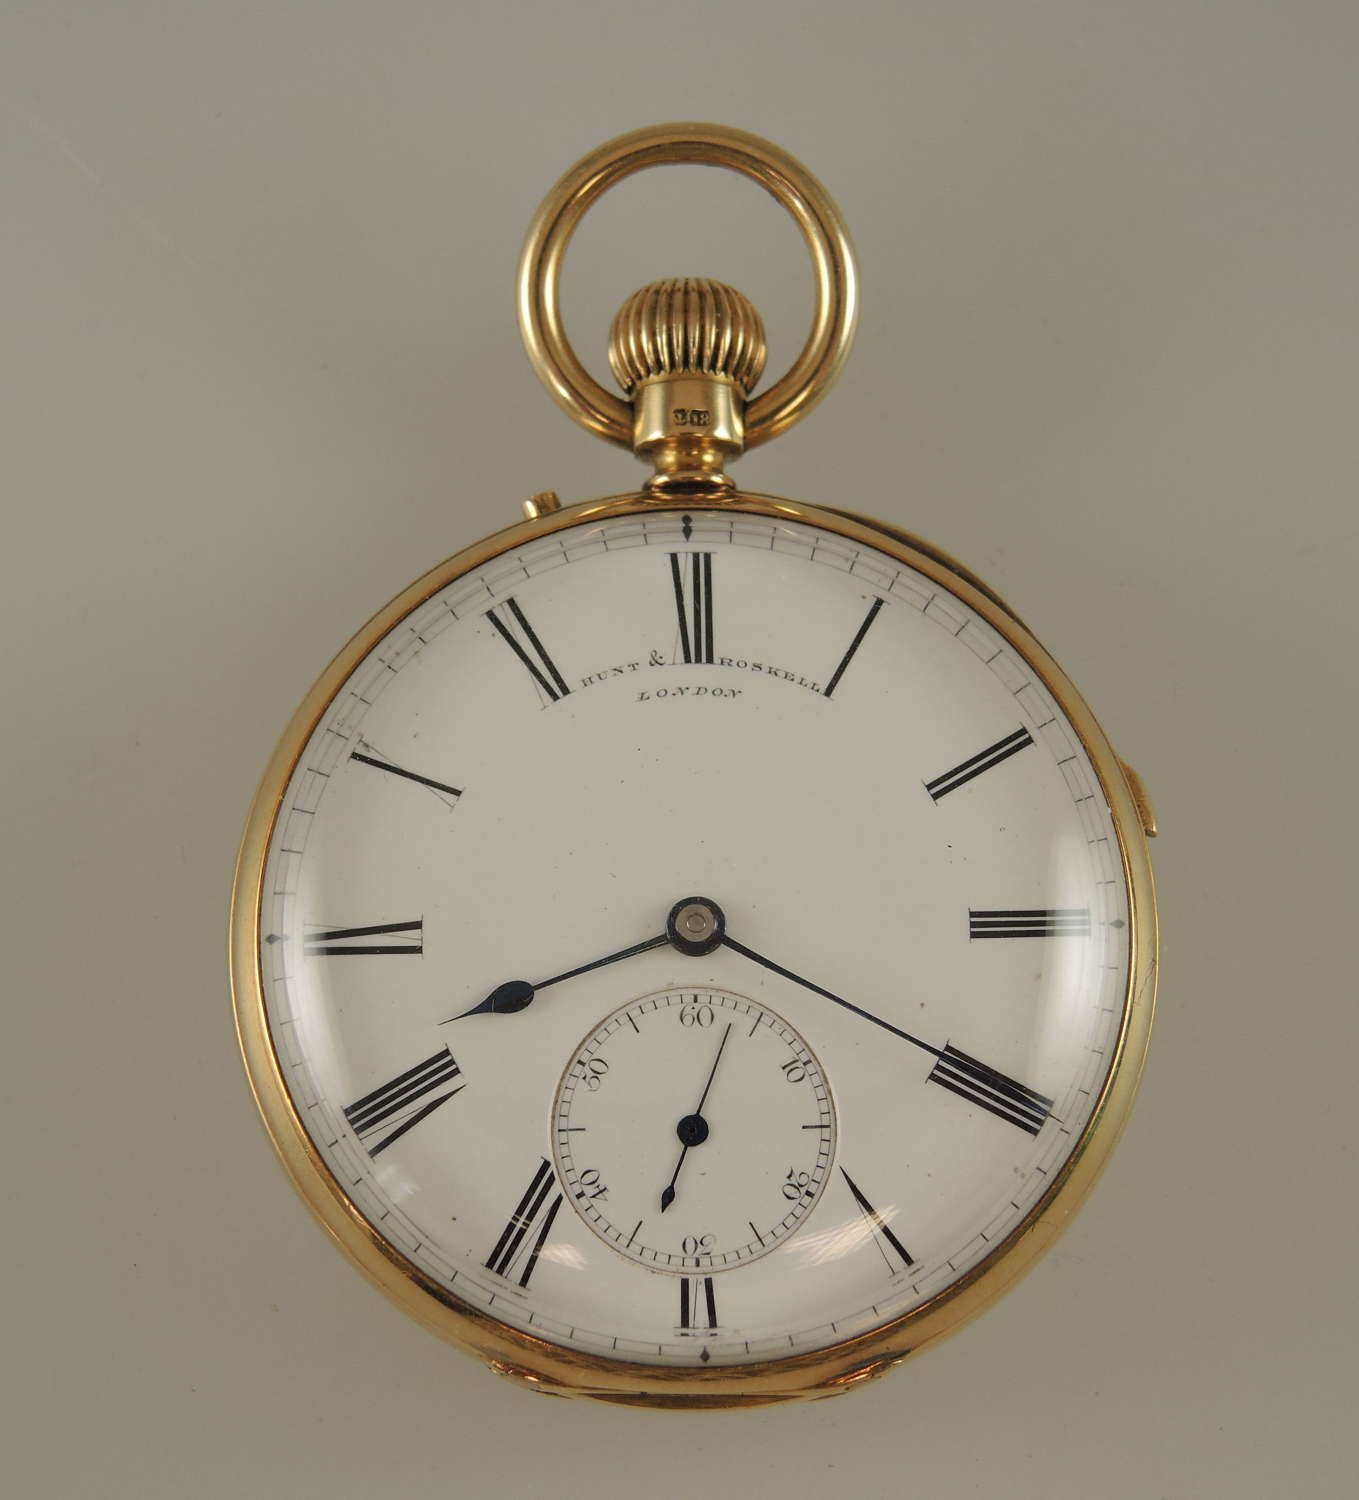 18K gold quarter repeater pocket watch by Hunt & Roskell c1875